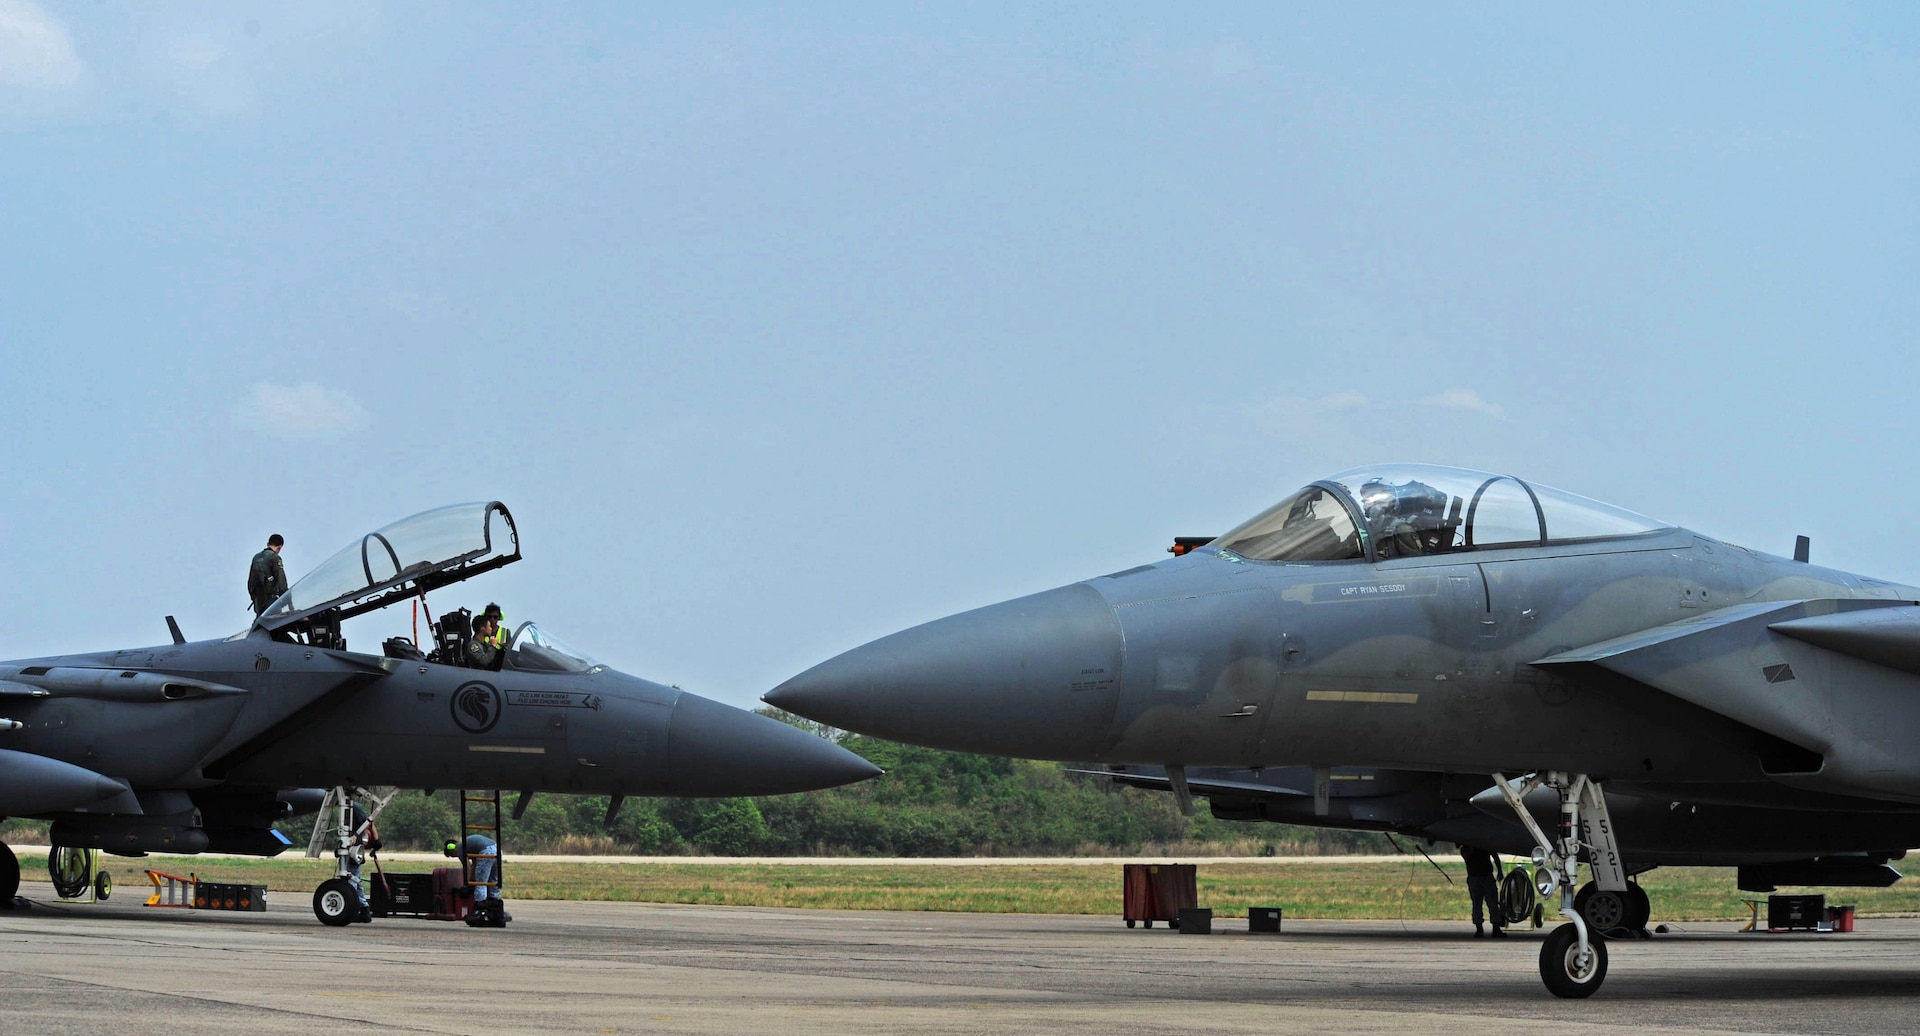 A U.S. Air Force F-15 (front) taxis past a Republic of Singapore air force F-15 during exercise Cope Tiger 17 at Korat Royal Thai Air Force Base, Thailand, March 24, 2017. The annual multilateral exercise, which involves a combined total of 76 aircraft and 43 air defense assets, is aimed at improving combined combat readiness and interoperability between the Republic of Singapore air force, Royal Thai air force, and U.S. Air Force, while concurrently enhancing the three nations' military relations. 